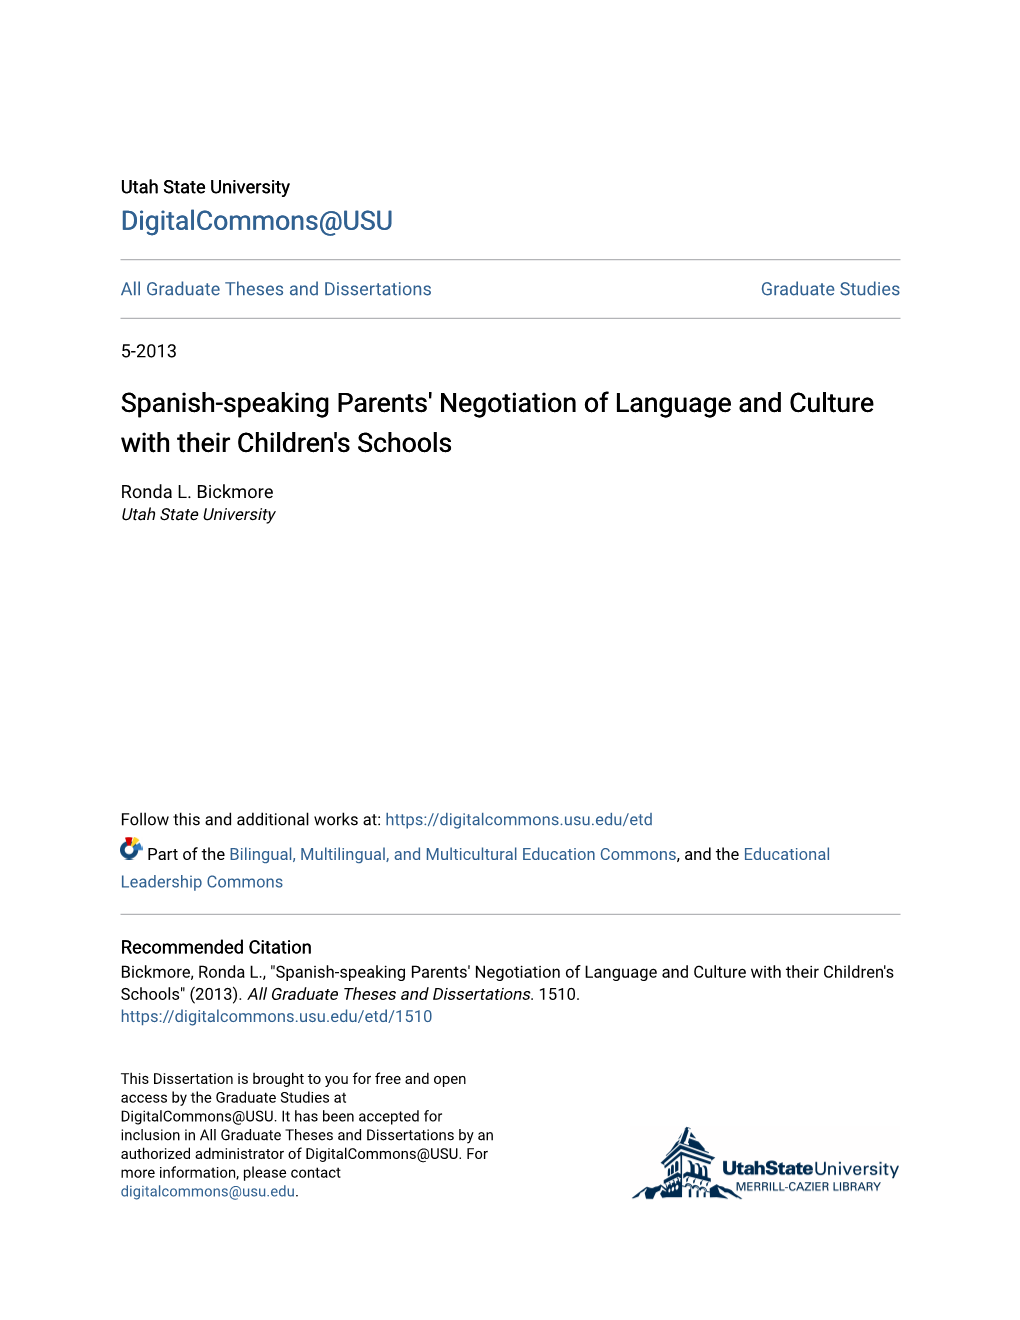 Spanish-Speaking Parents' Negotiation of Language and Culture with Their Children's Schools